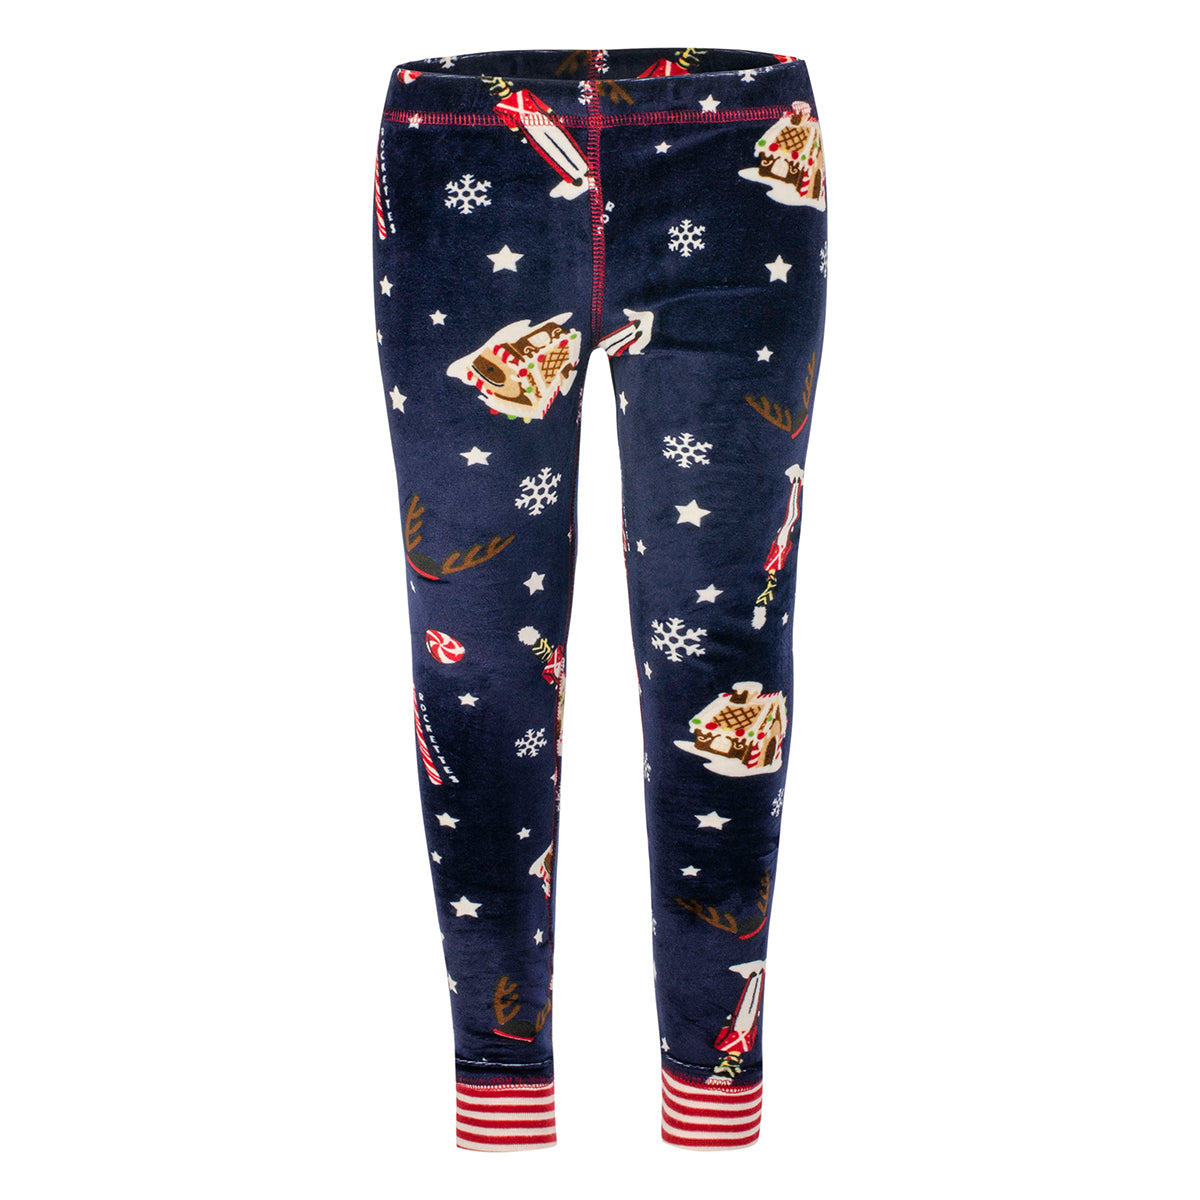 Blue Christmas pajamas from front view with snowy print, candy-cane patterns and toy soldier design